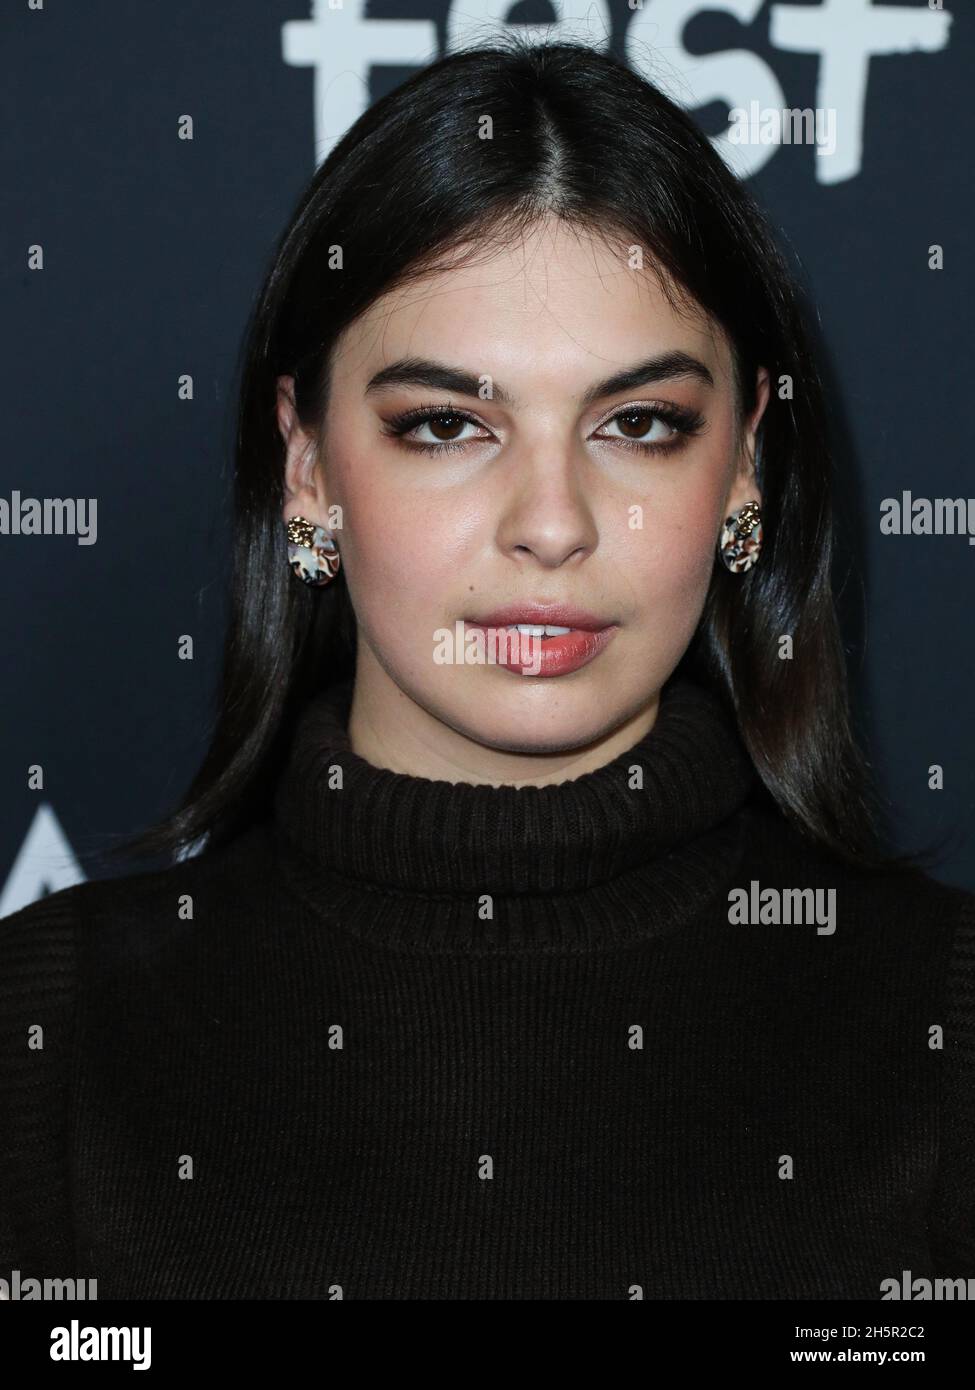 Hollywood, United States. 10th Nov, 2021. HOLLYWOOD, LOS ANGELES, CALIFORNIA, USA - NOVEMBER 10: Actress Isabella Gomez arrives at the 2021 AFI Fest - Opening Night Gala Premiere Of Netflix's 'tick, tick…BOOM!' held at the TCL Chinese Theatre IMAX on November 10, 2021 in Hollywood, Los Angeles, California, United States. (Photo by Xavier Collin/Image Press Agency/Sipa USA) Credit: Sipa USA/Alamy Live News Stock Photo